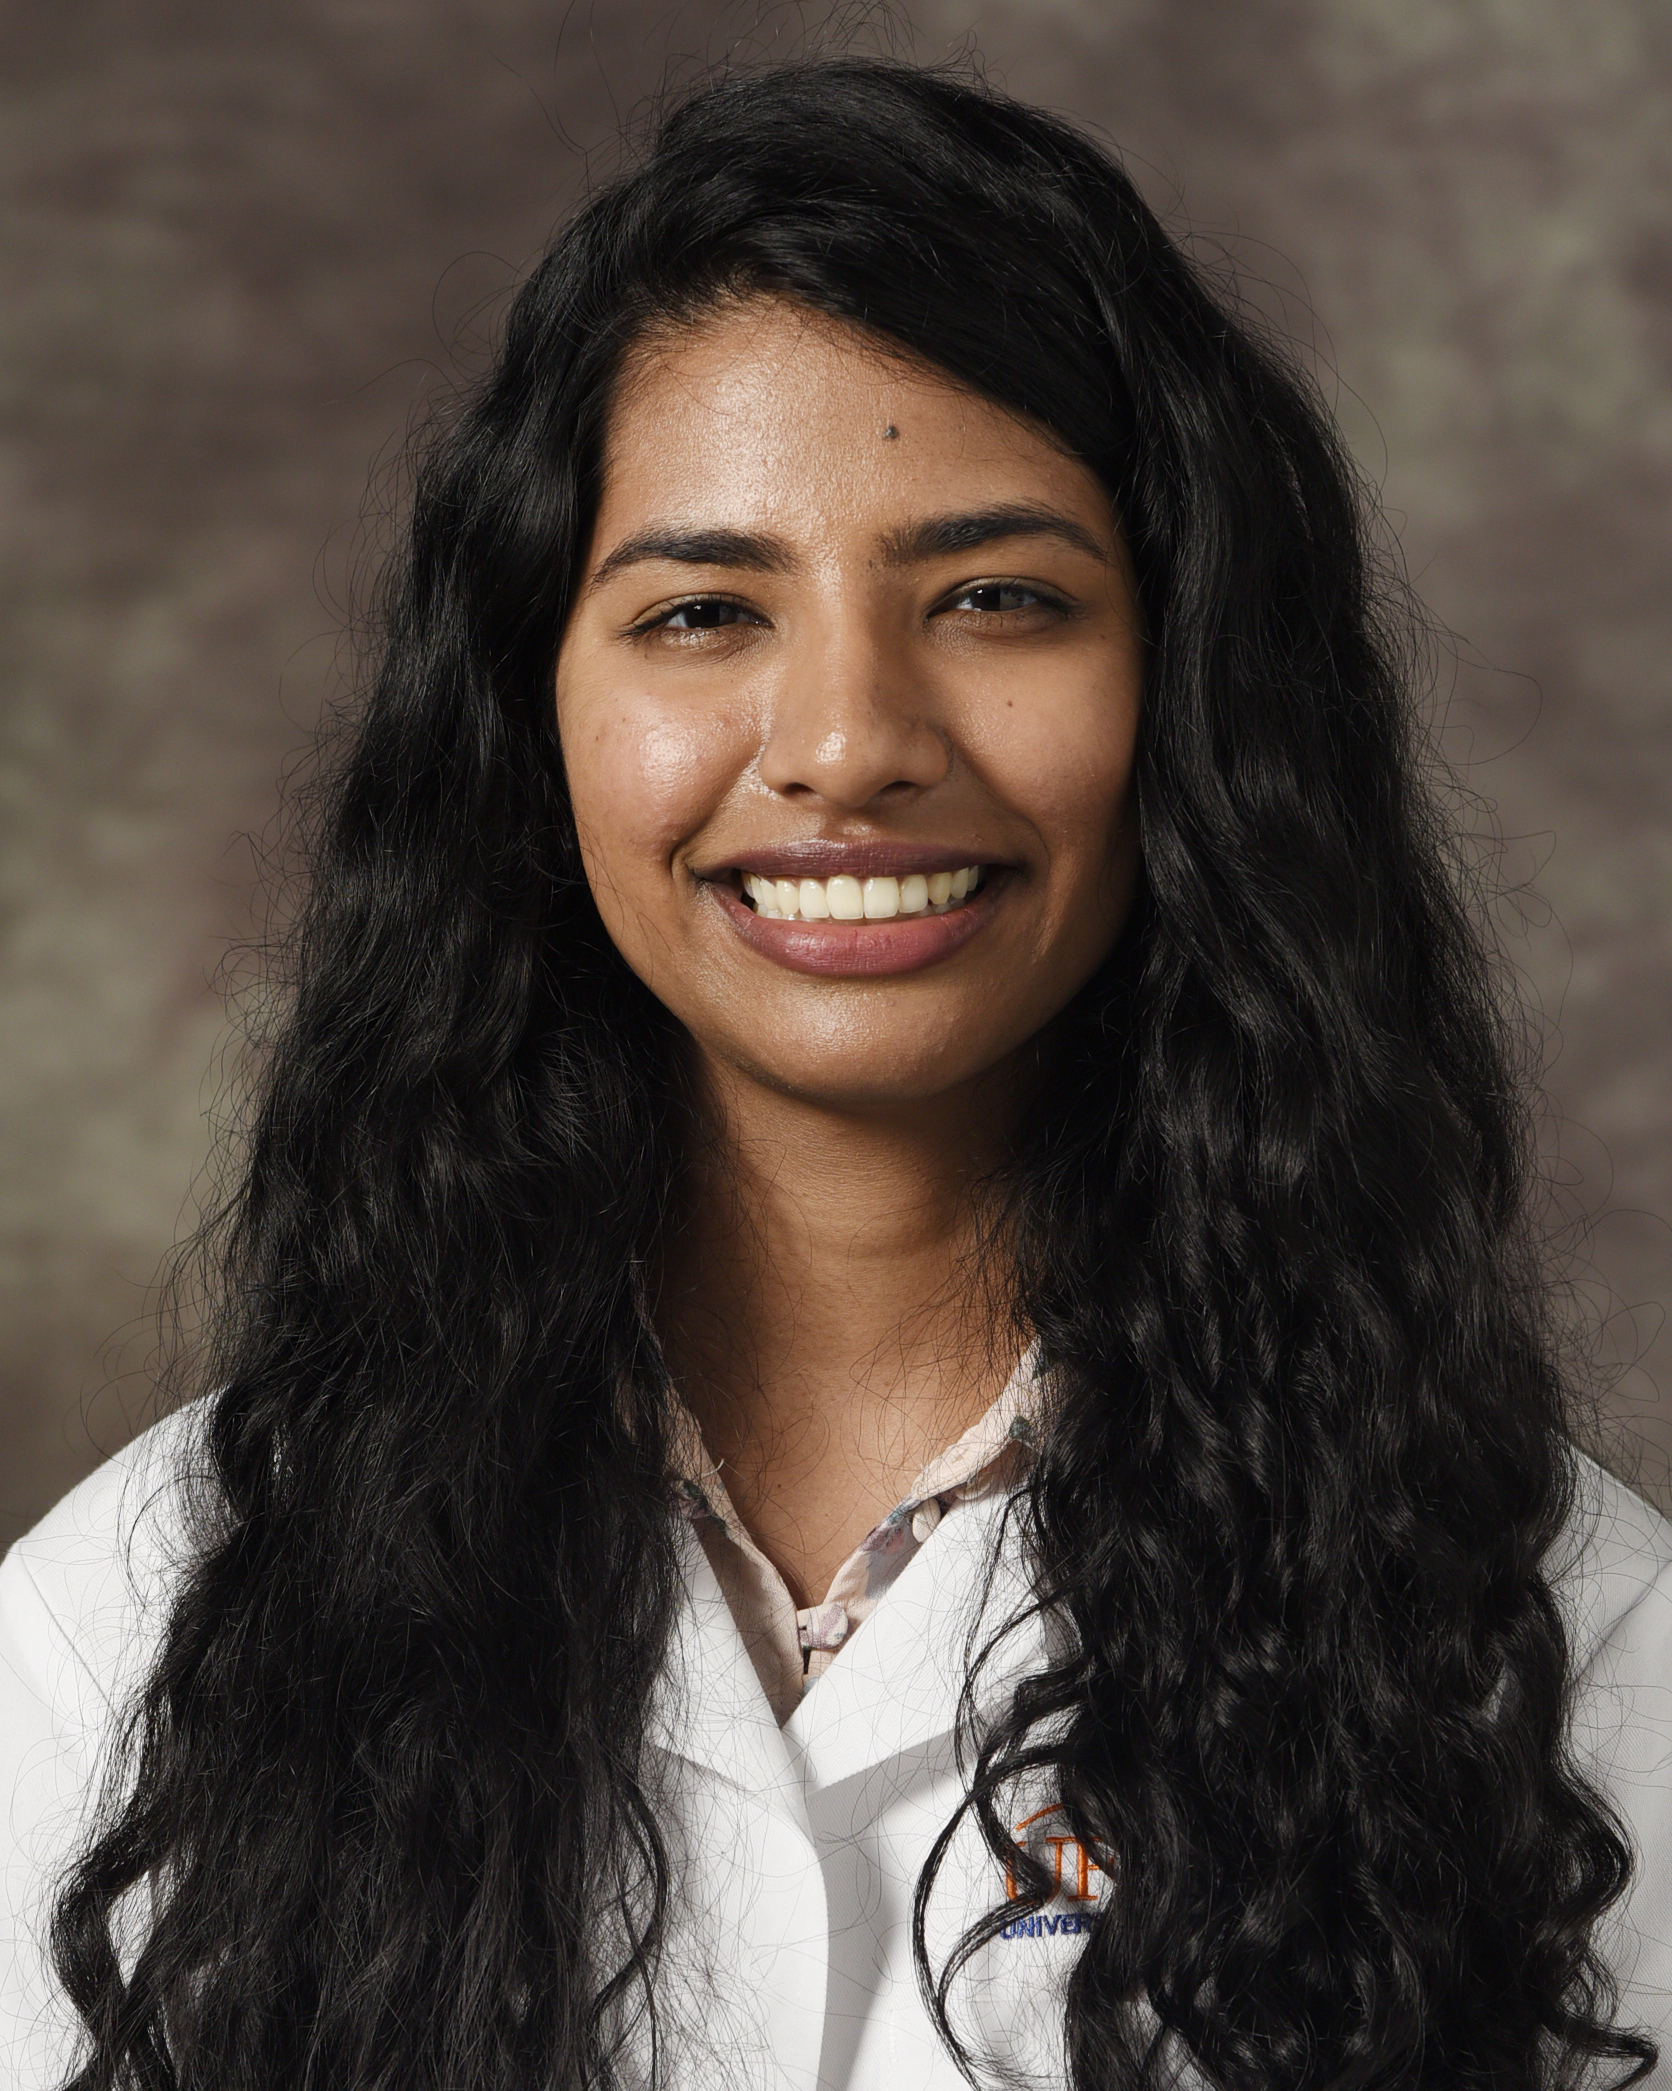 Image: Abi Krishna, who completed her residency training earlier this year, was the 2023 resident award recipient.